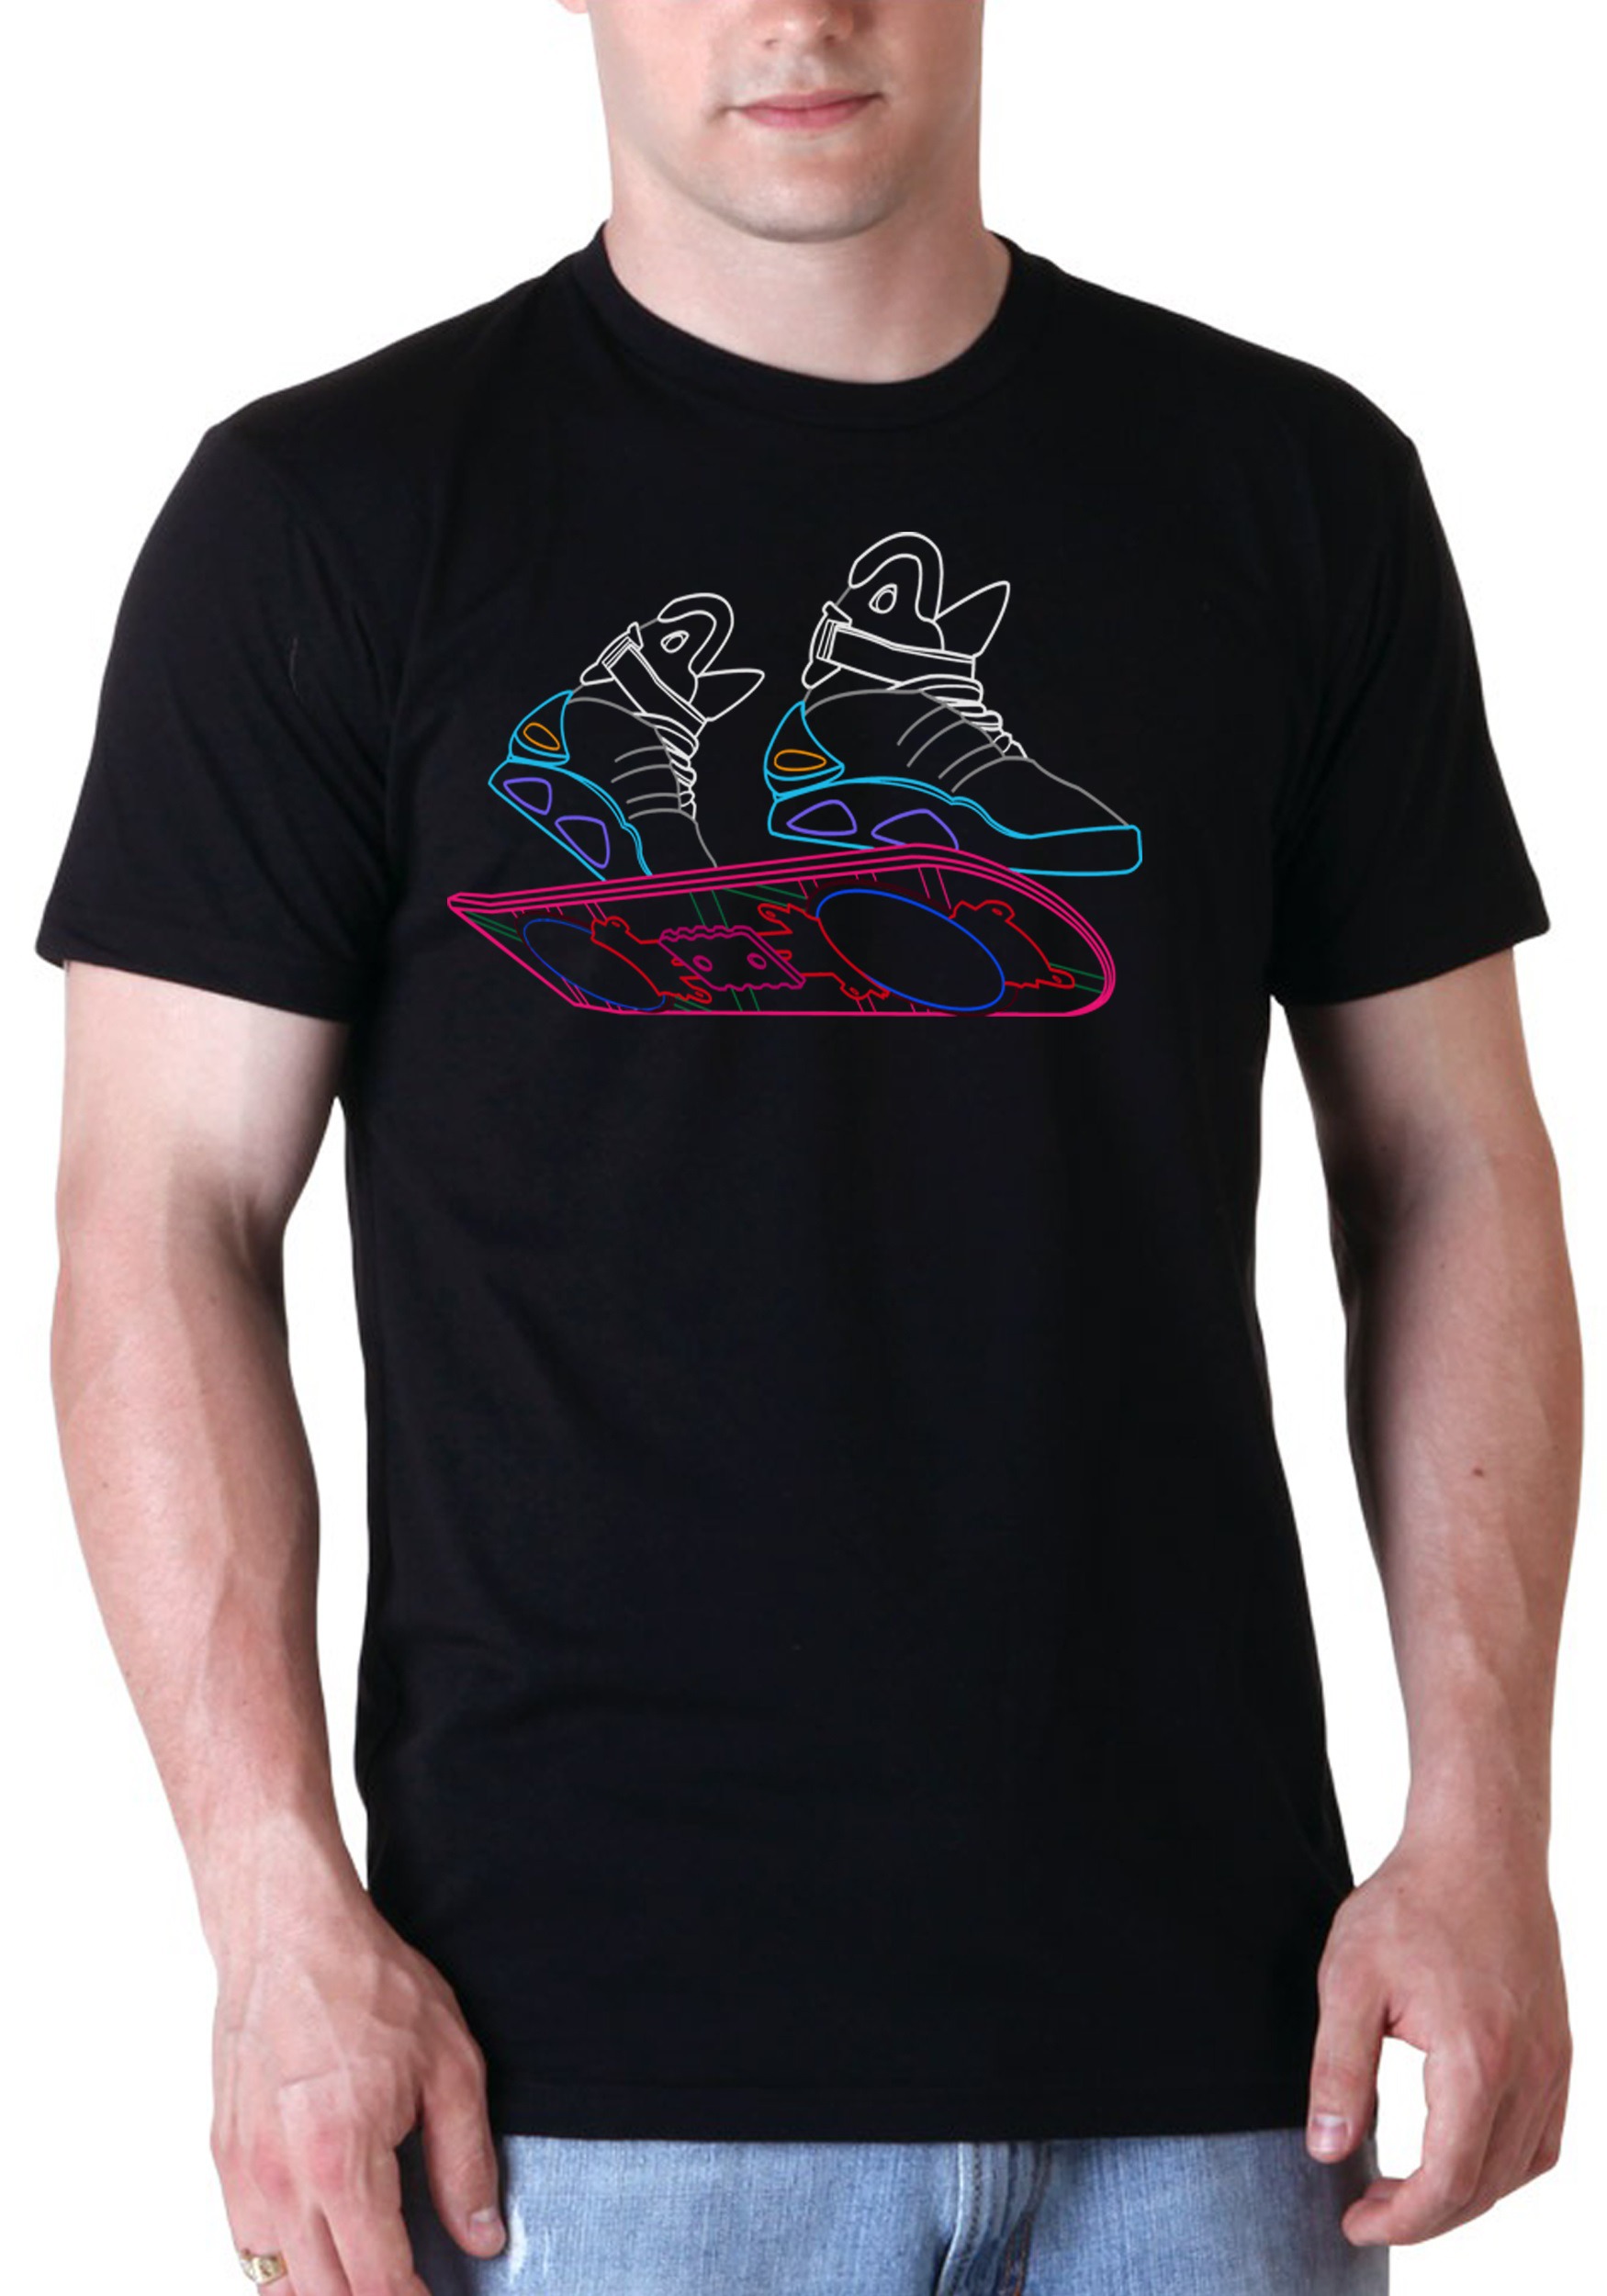 Back to the Future 2015 T-Shirt for Men